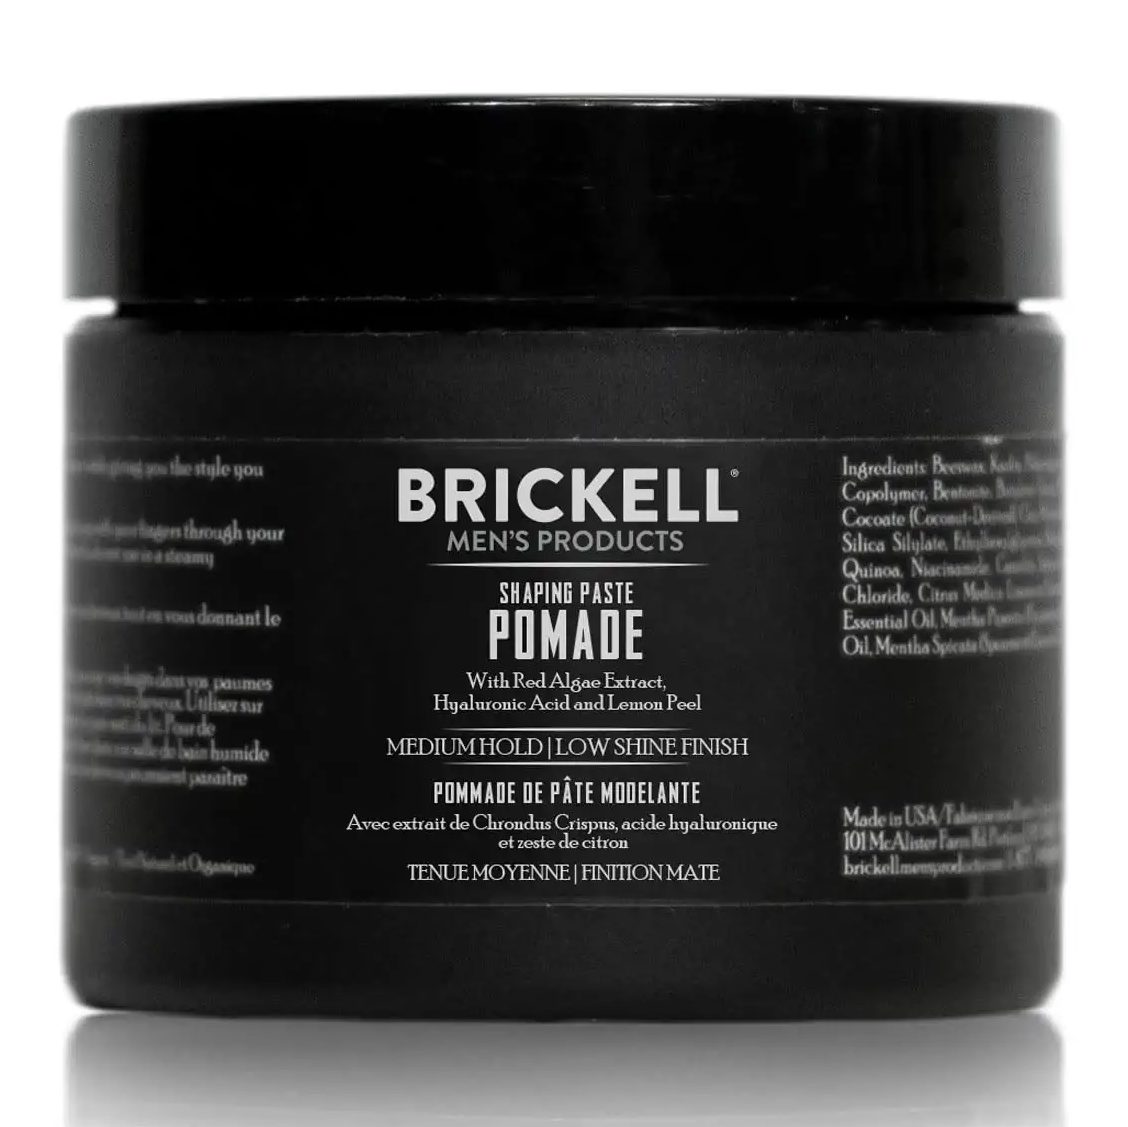 Brickell Men's Products Shaping Paste Pomade For Men, All Natural, Texturizing Wax Pomade, 2 Ounce, Scented